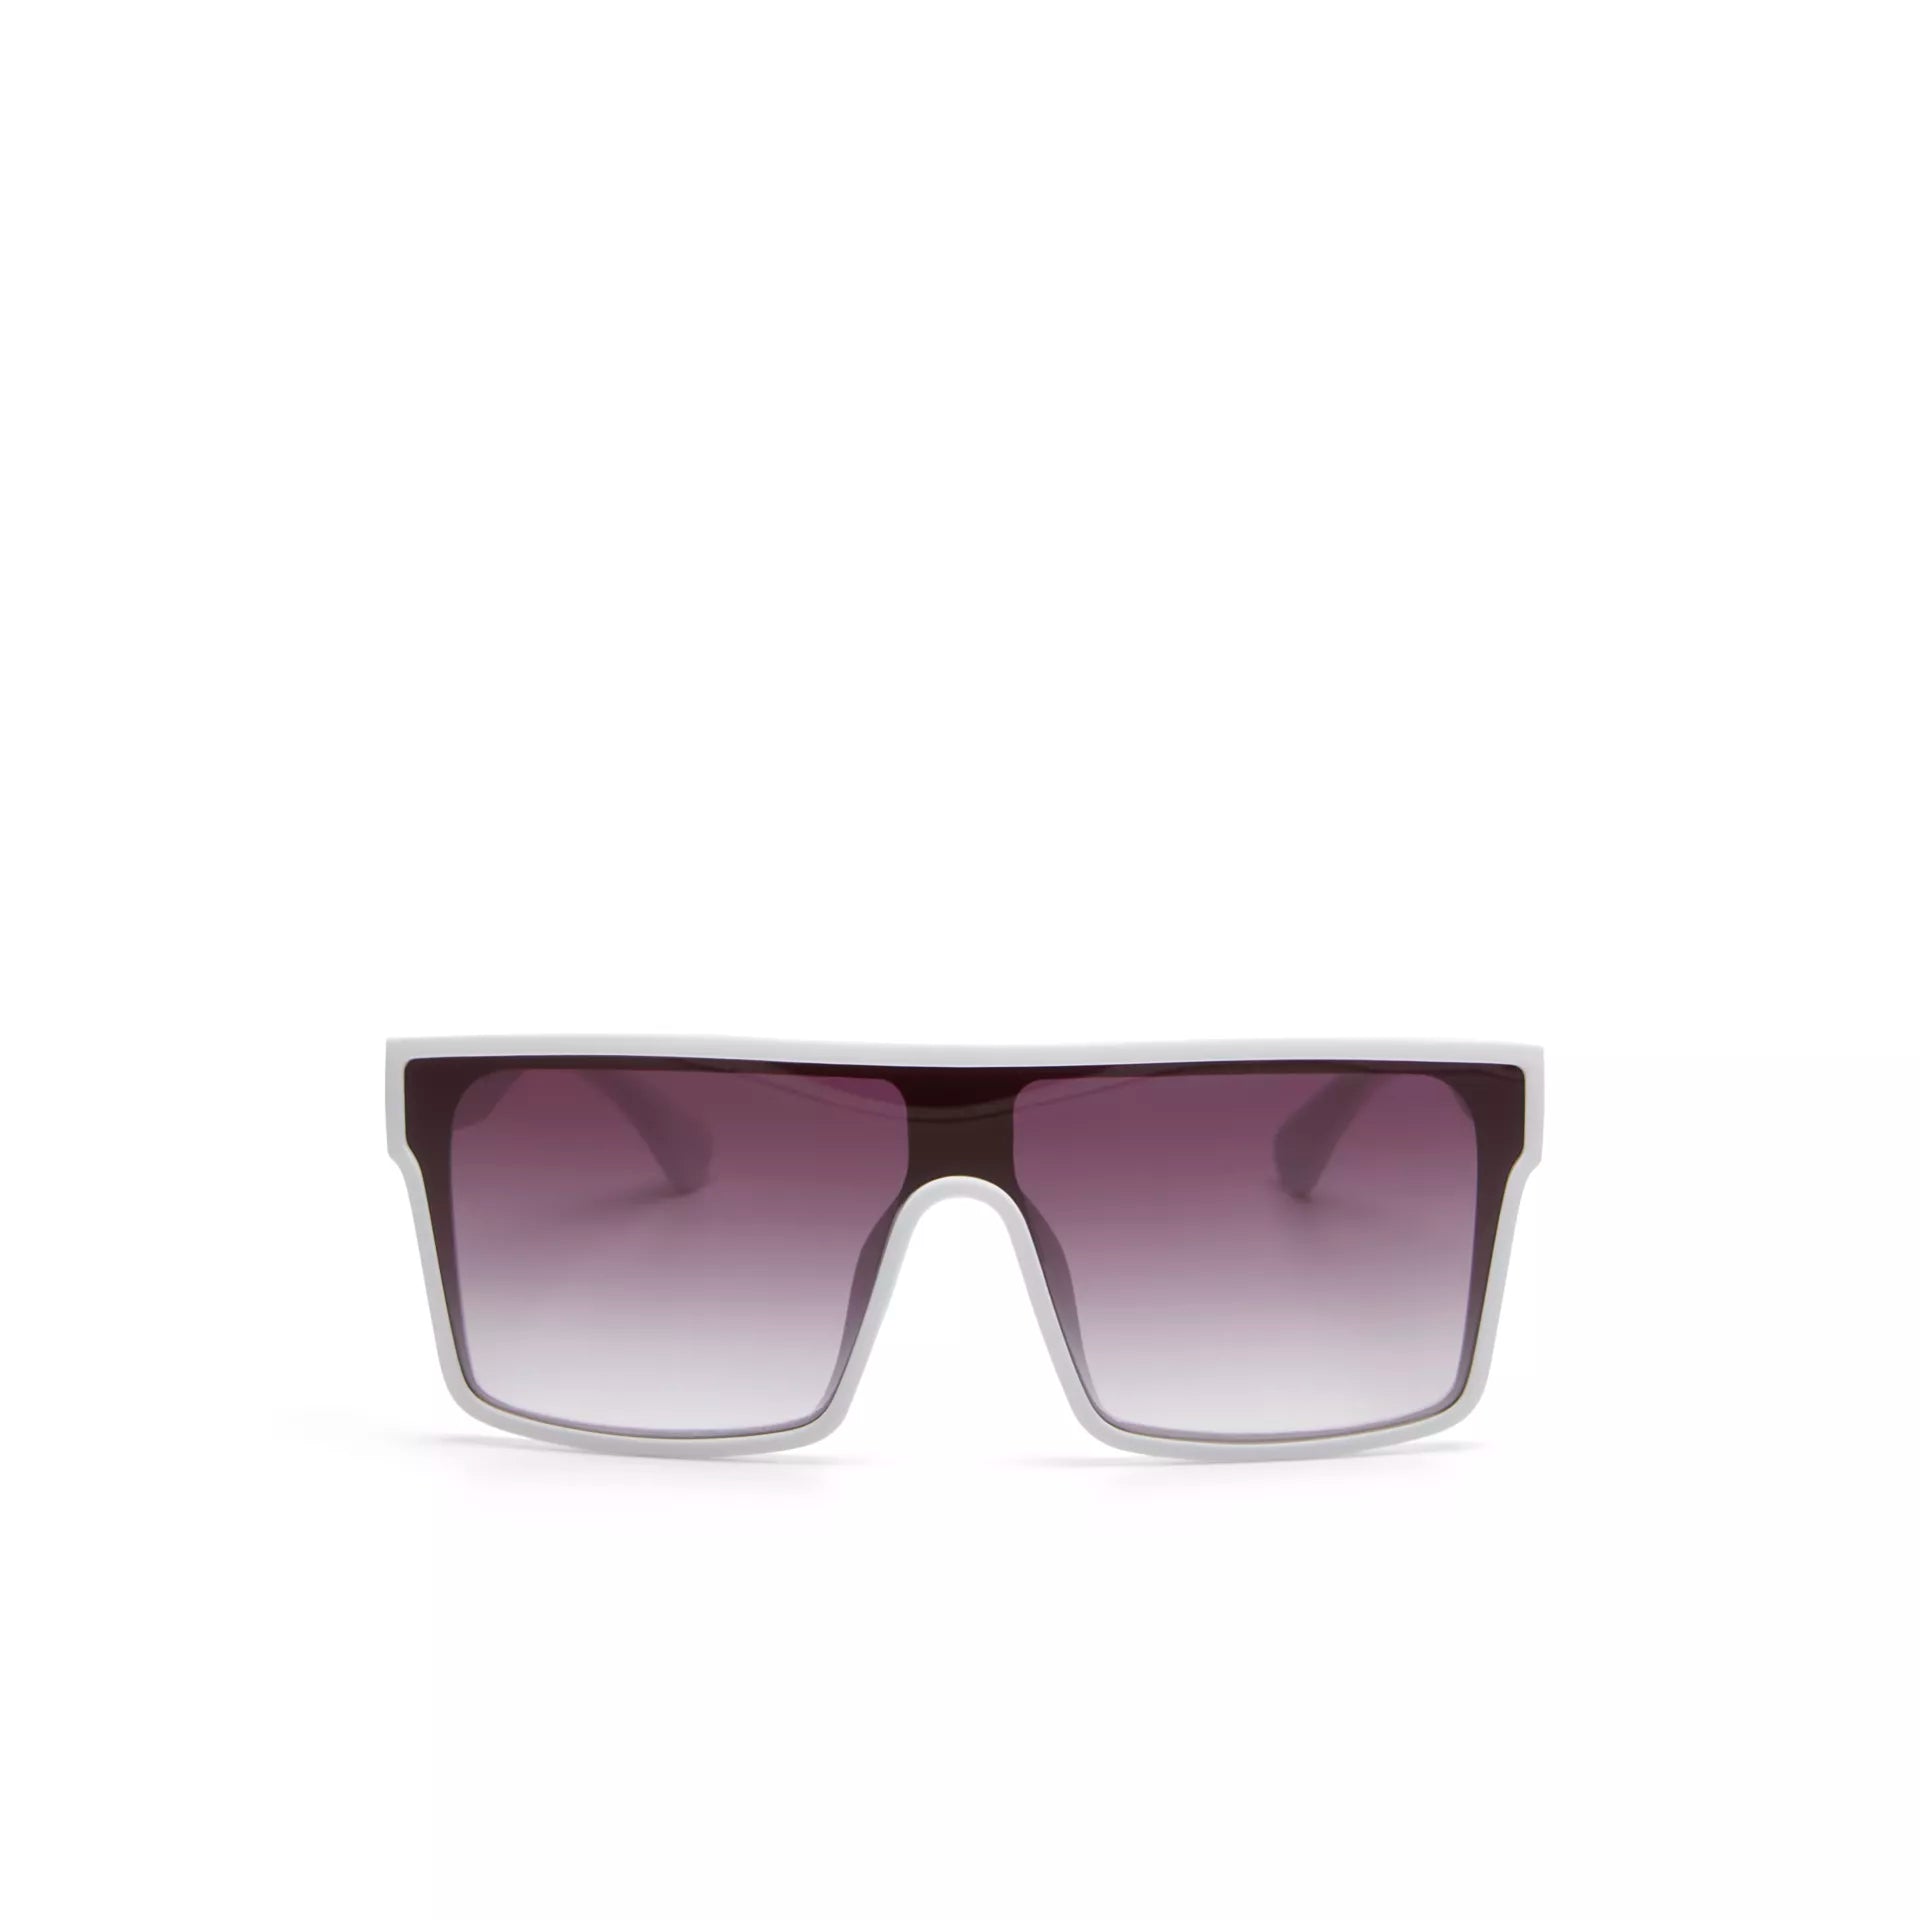 Fabulous Gifts Okkia Sunglasses Tokyo Optical White by Weirs of Baggot Street